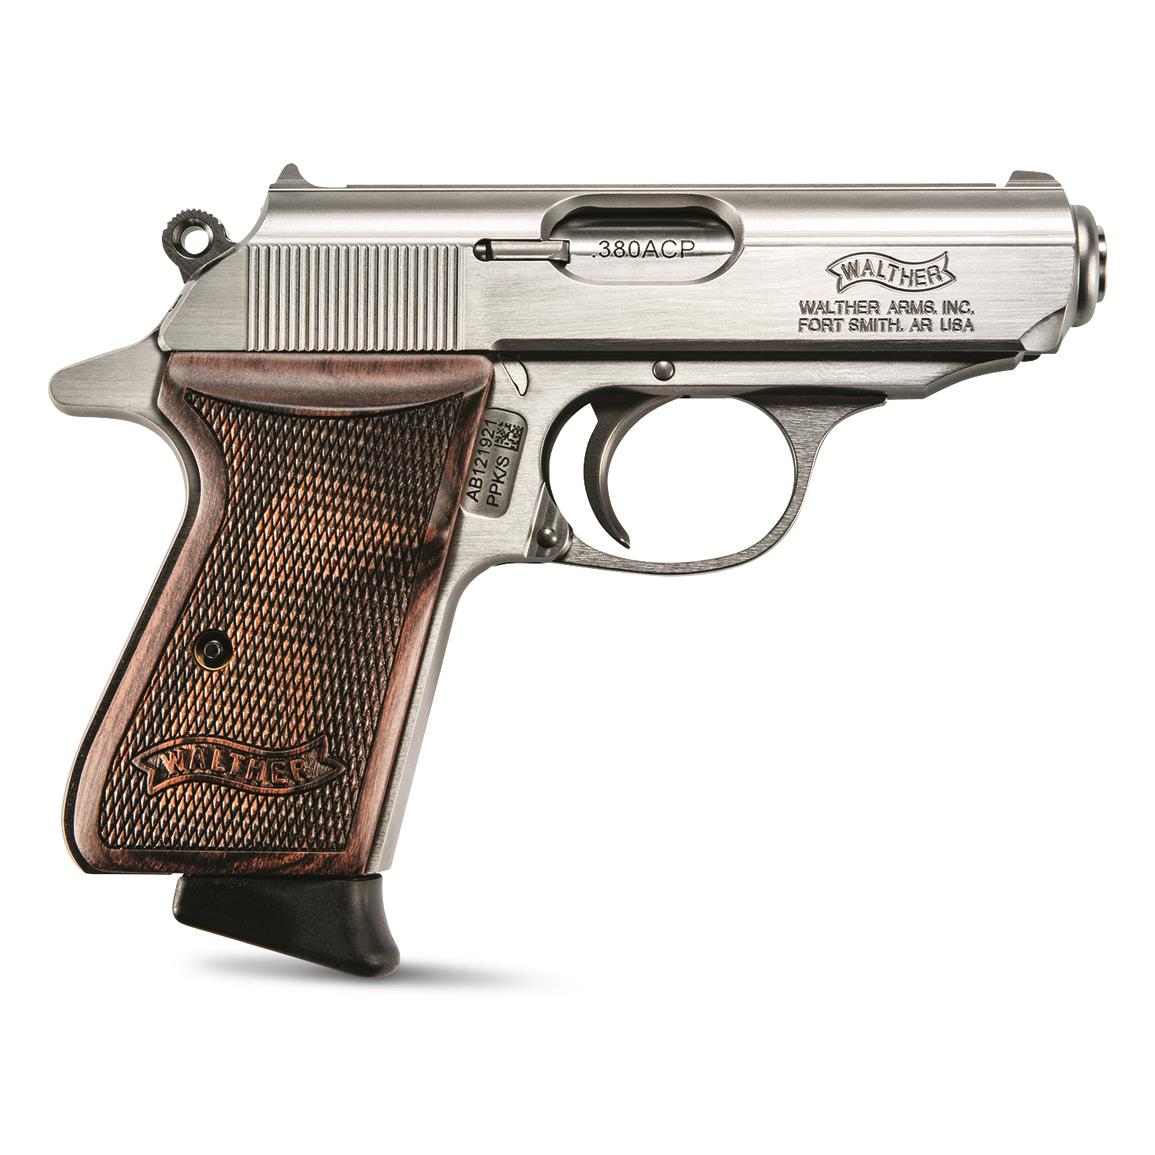 Walther PPK/S Stainless, Semi-automatic, .380 ACP, 3.3" Barrel, Walnut Grips, 7+1 Rounds